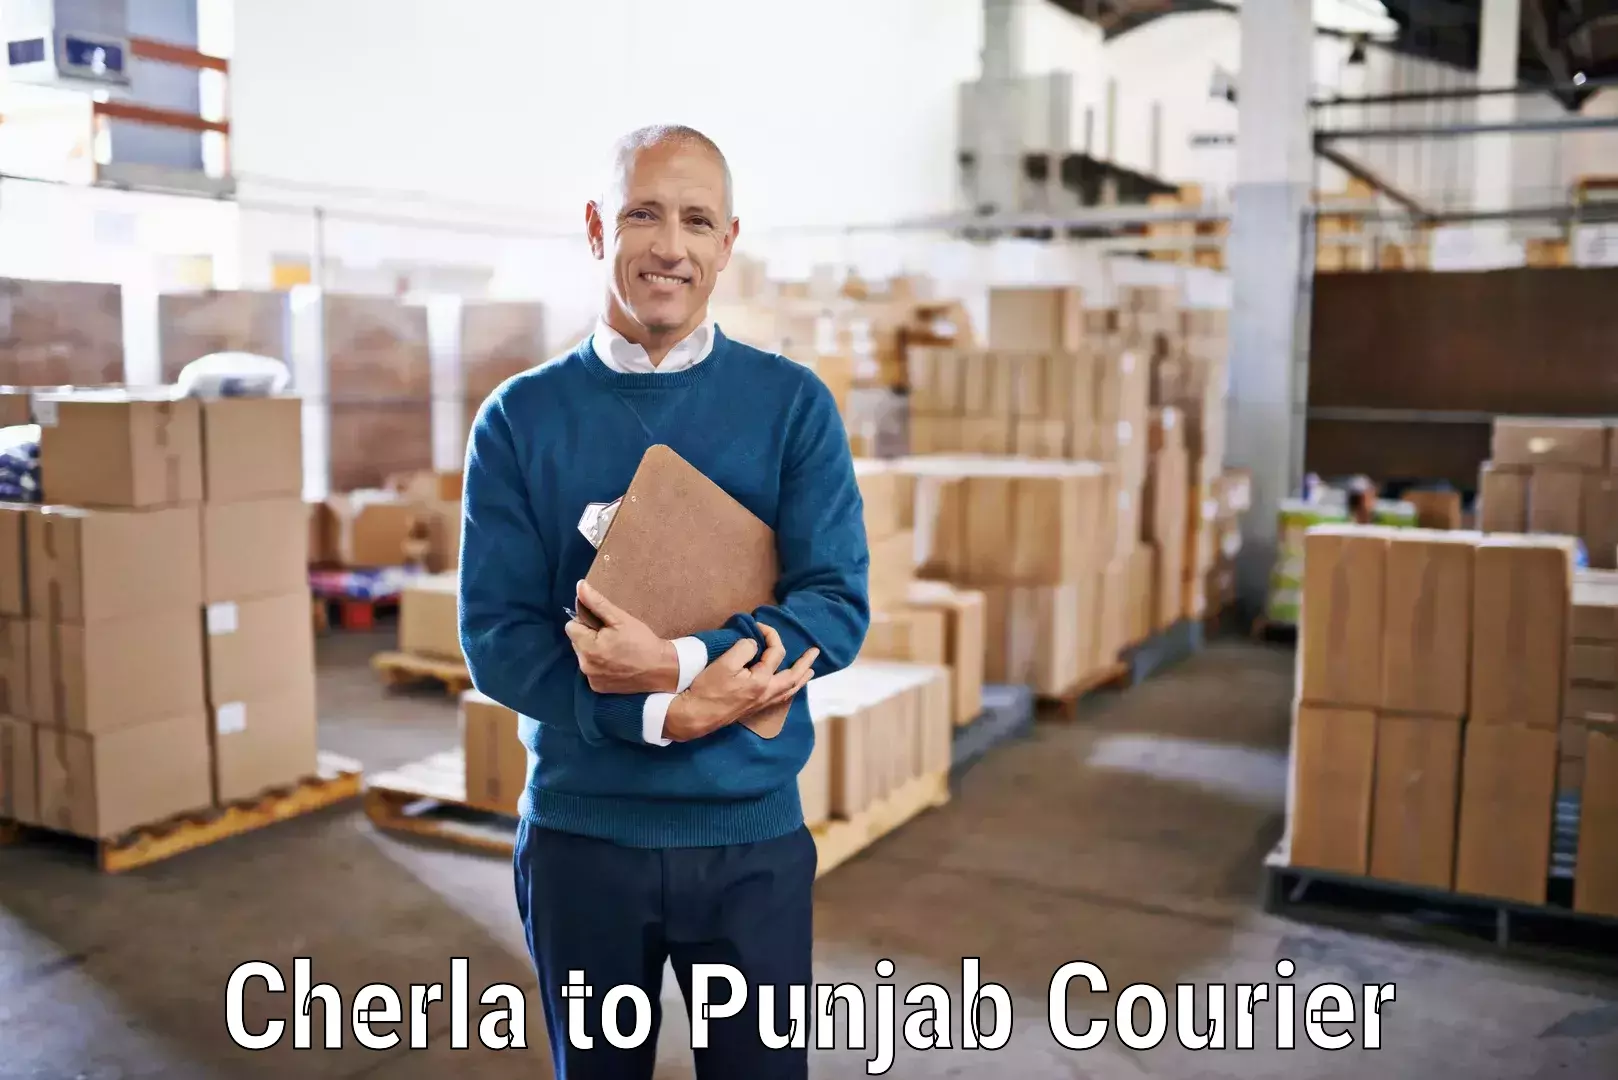 Secure package delivery Cherla to Punjab